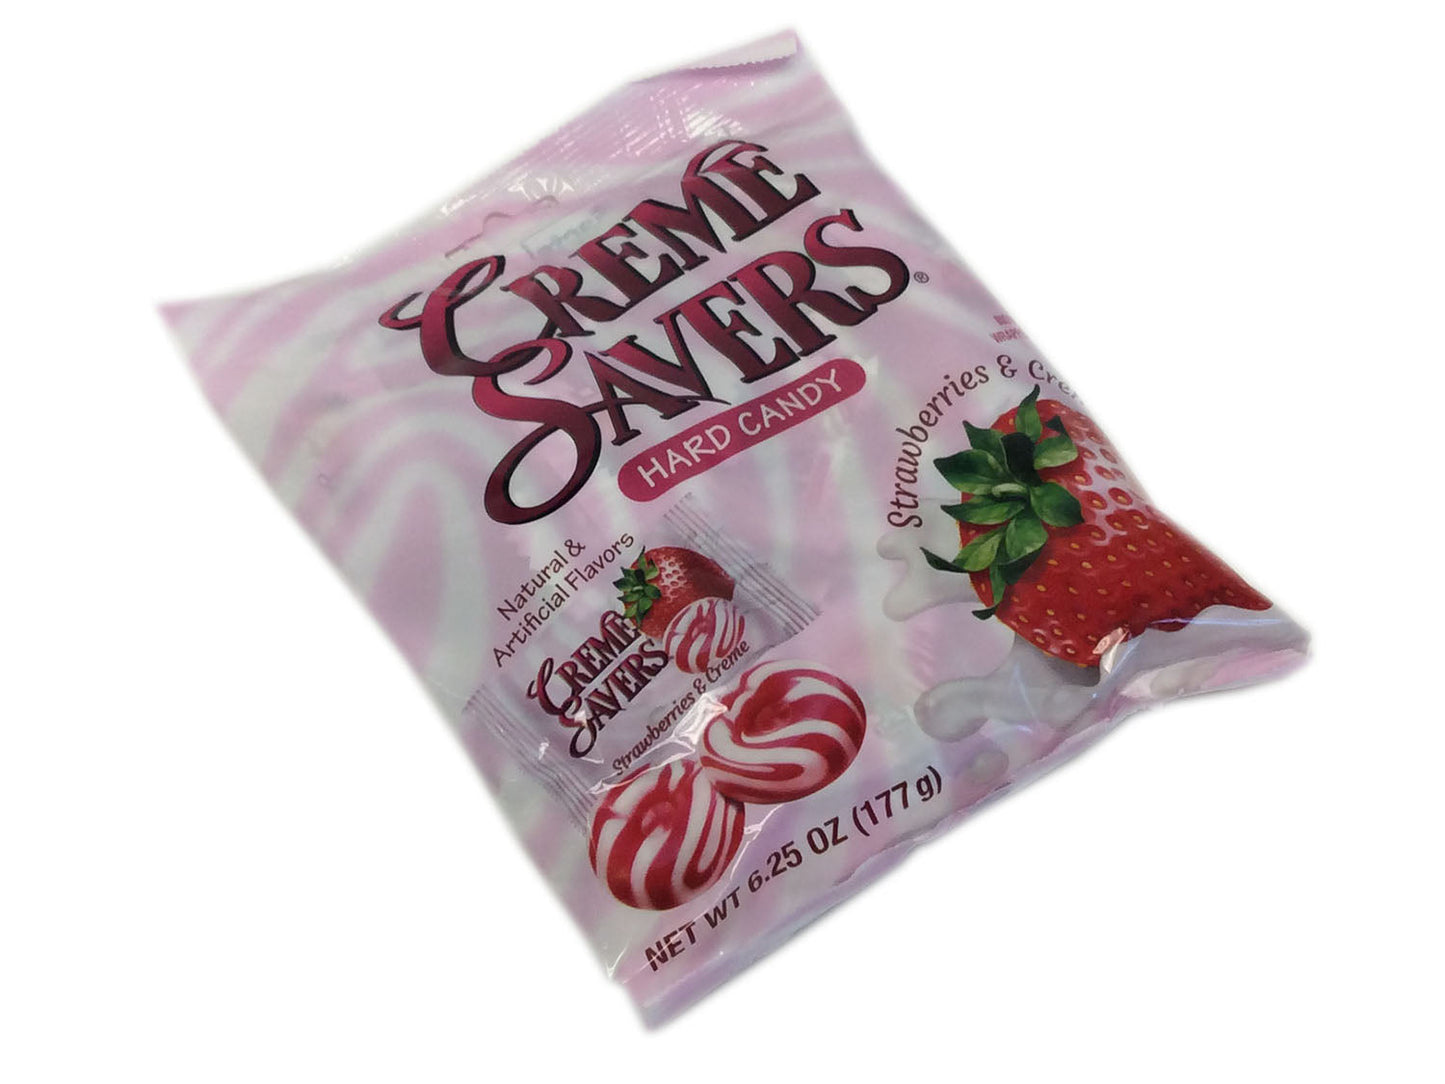 Some of the best discontinued sweets. Campino sweets were my favourite